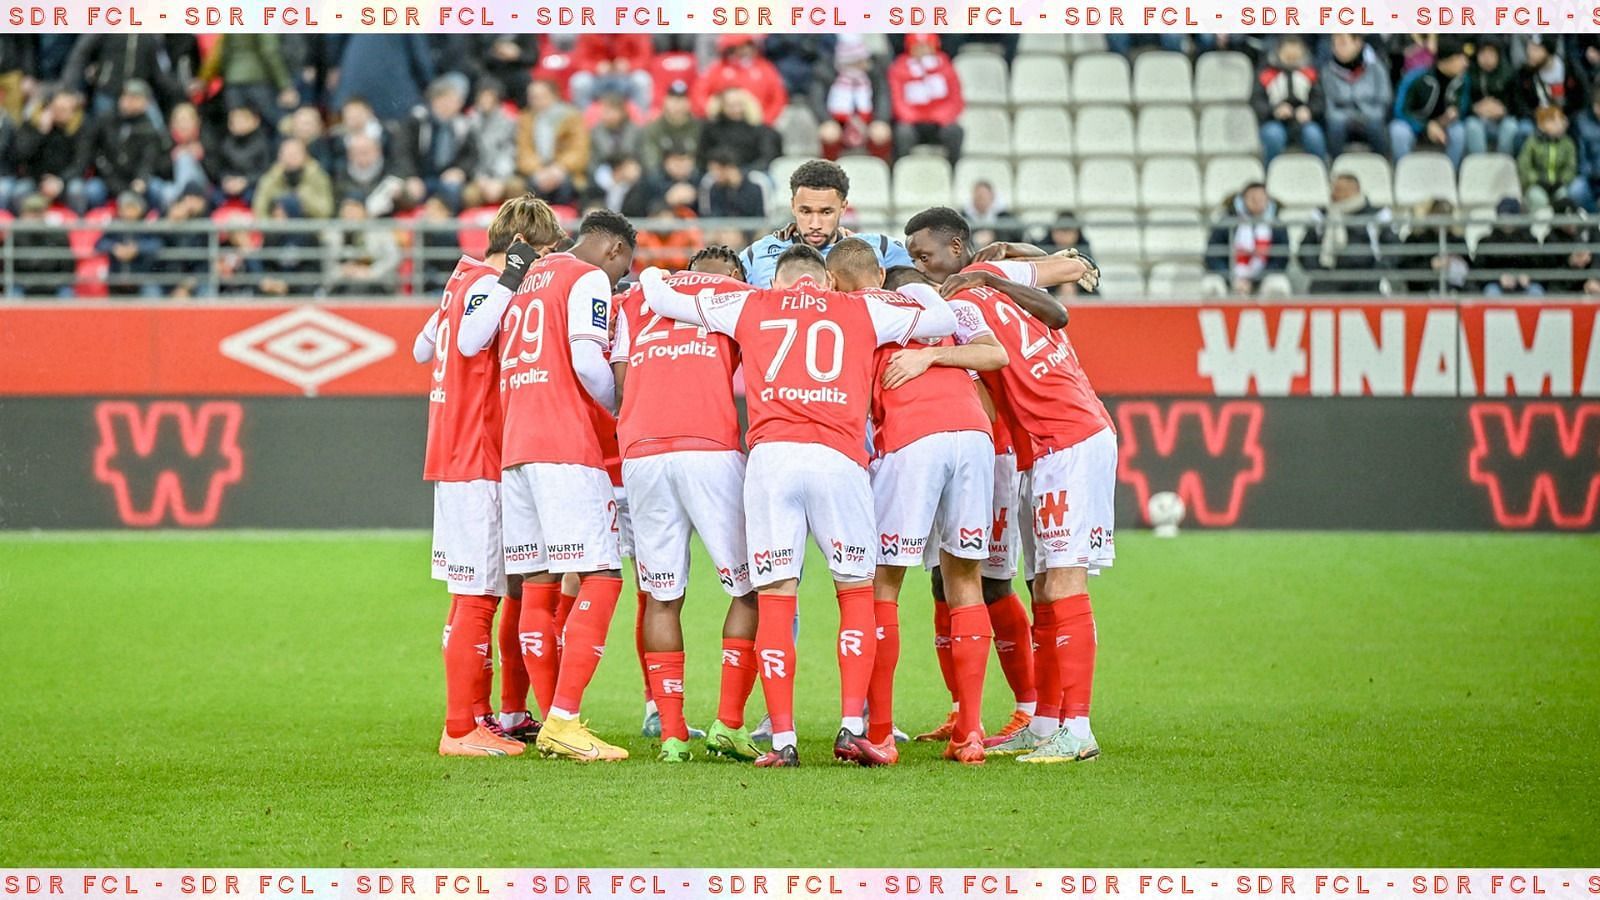 Stade Reims will face Auxerre on Sunday 